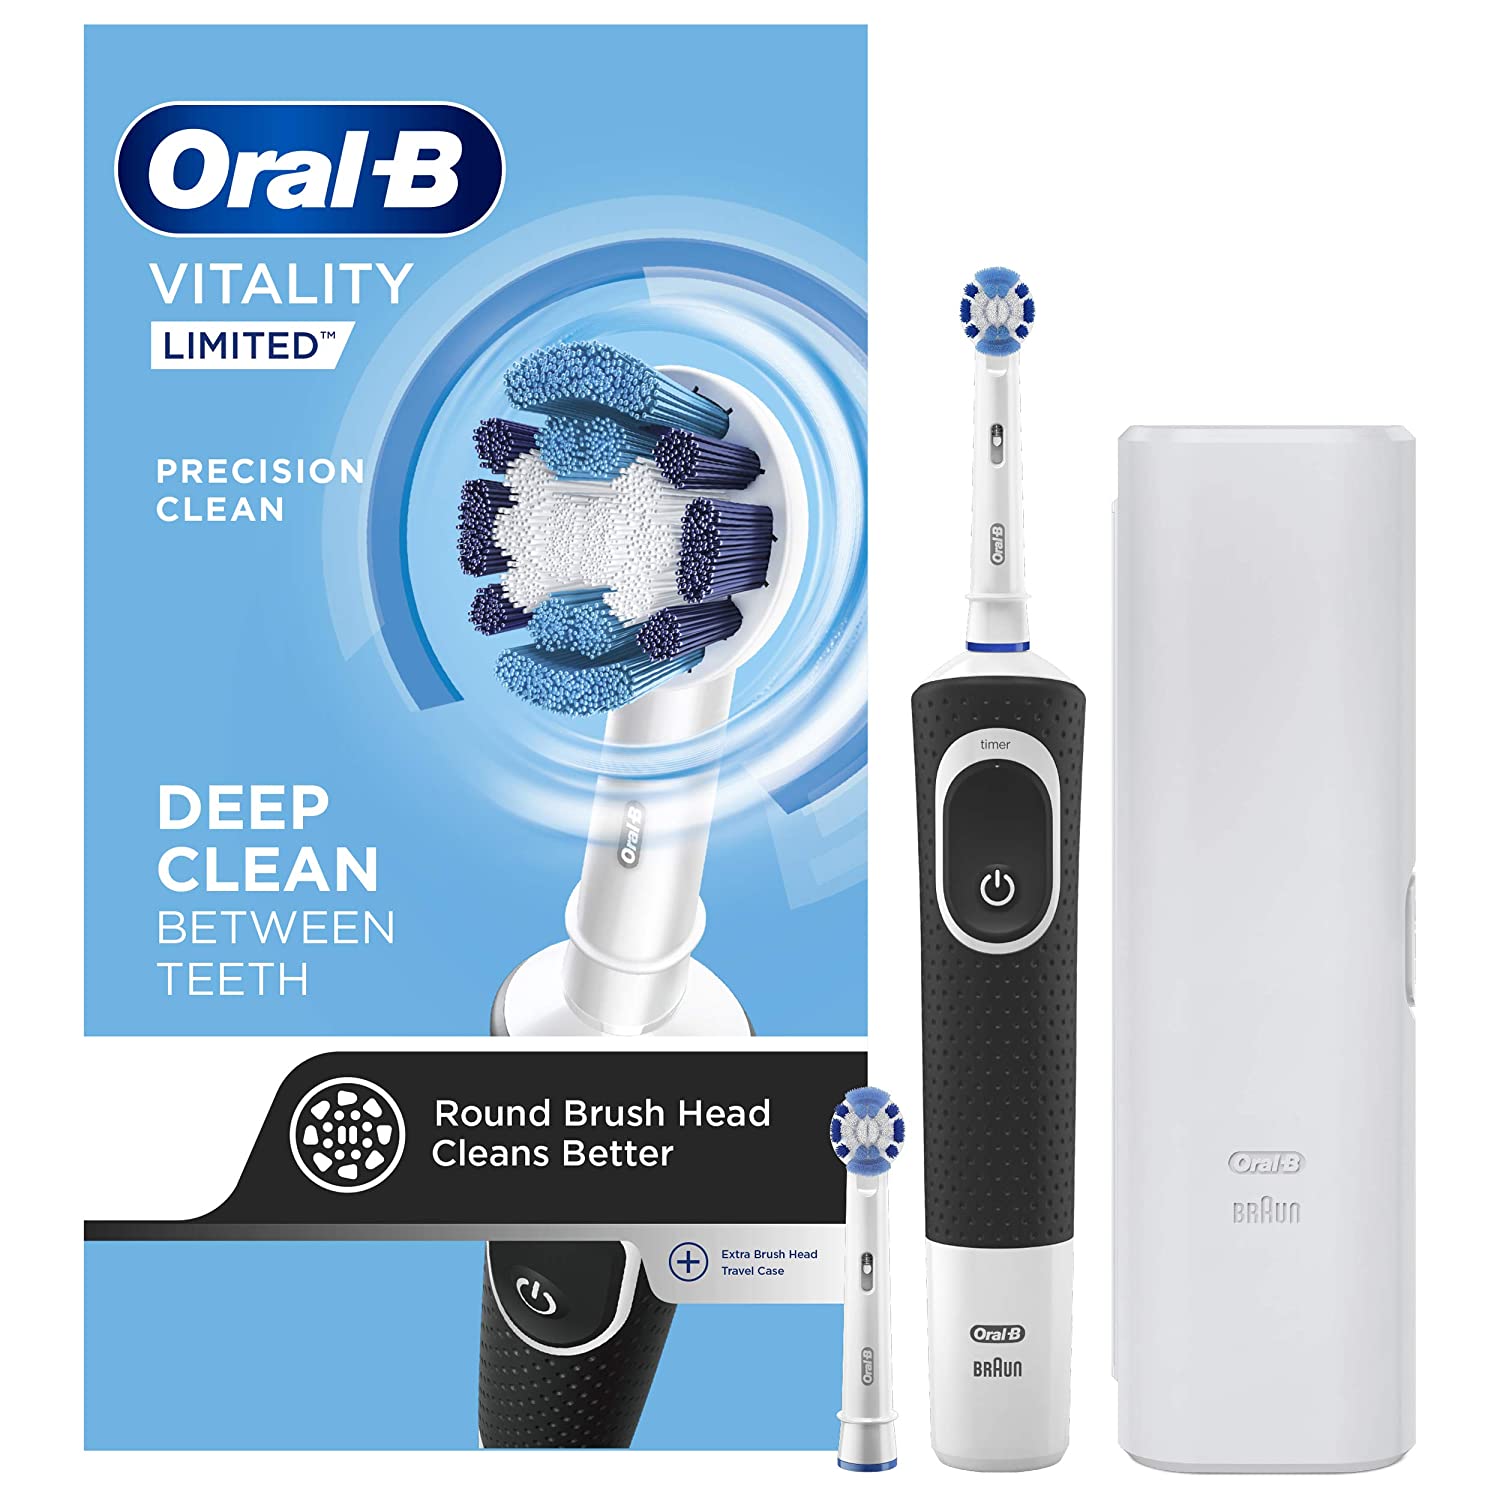 Oral-B Vitality Limited Precision Clean Rechargeable Toothbrush-3